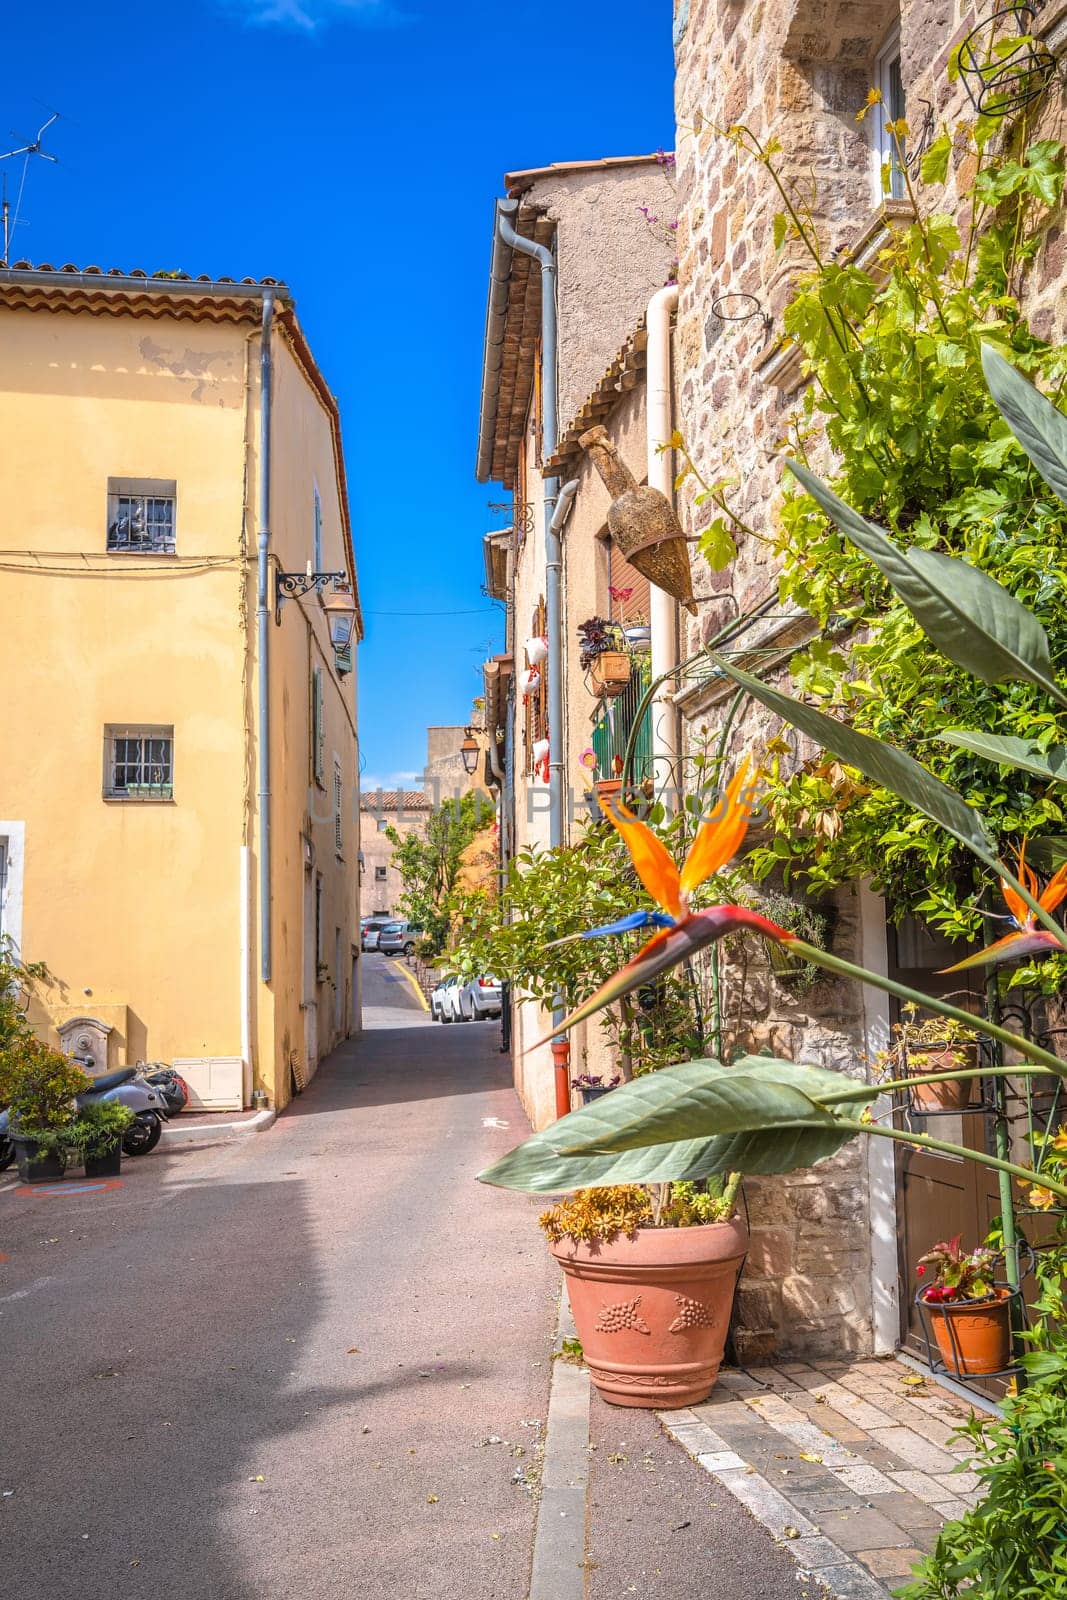 Town of Frejus colorful street architecture view, south of France